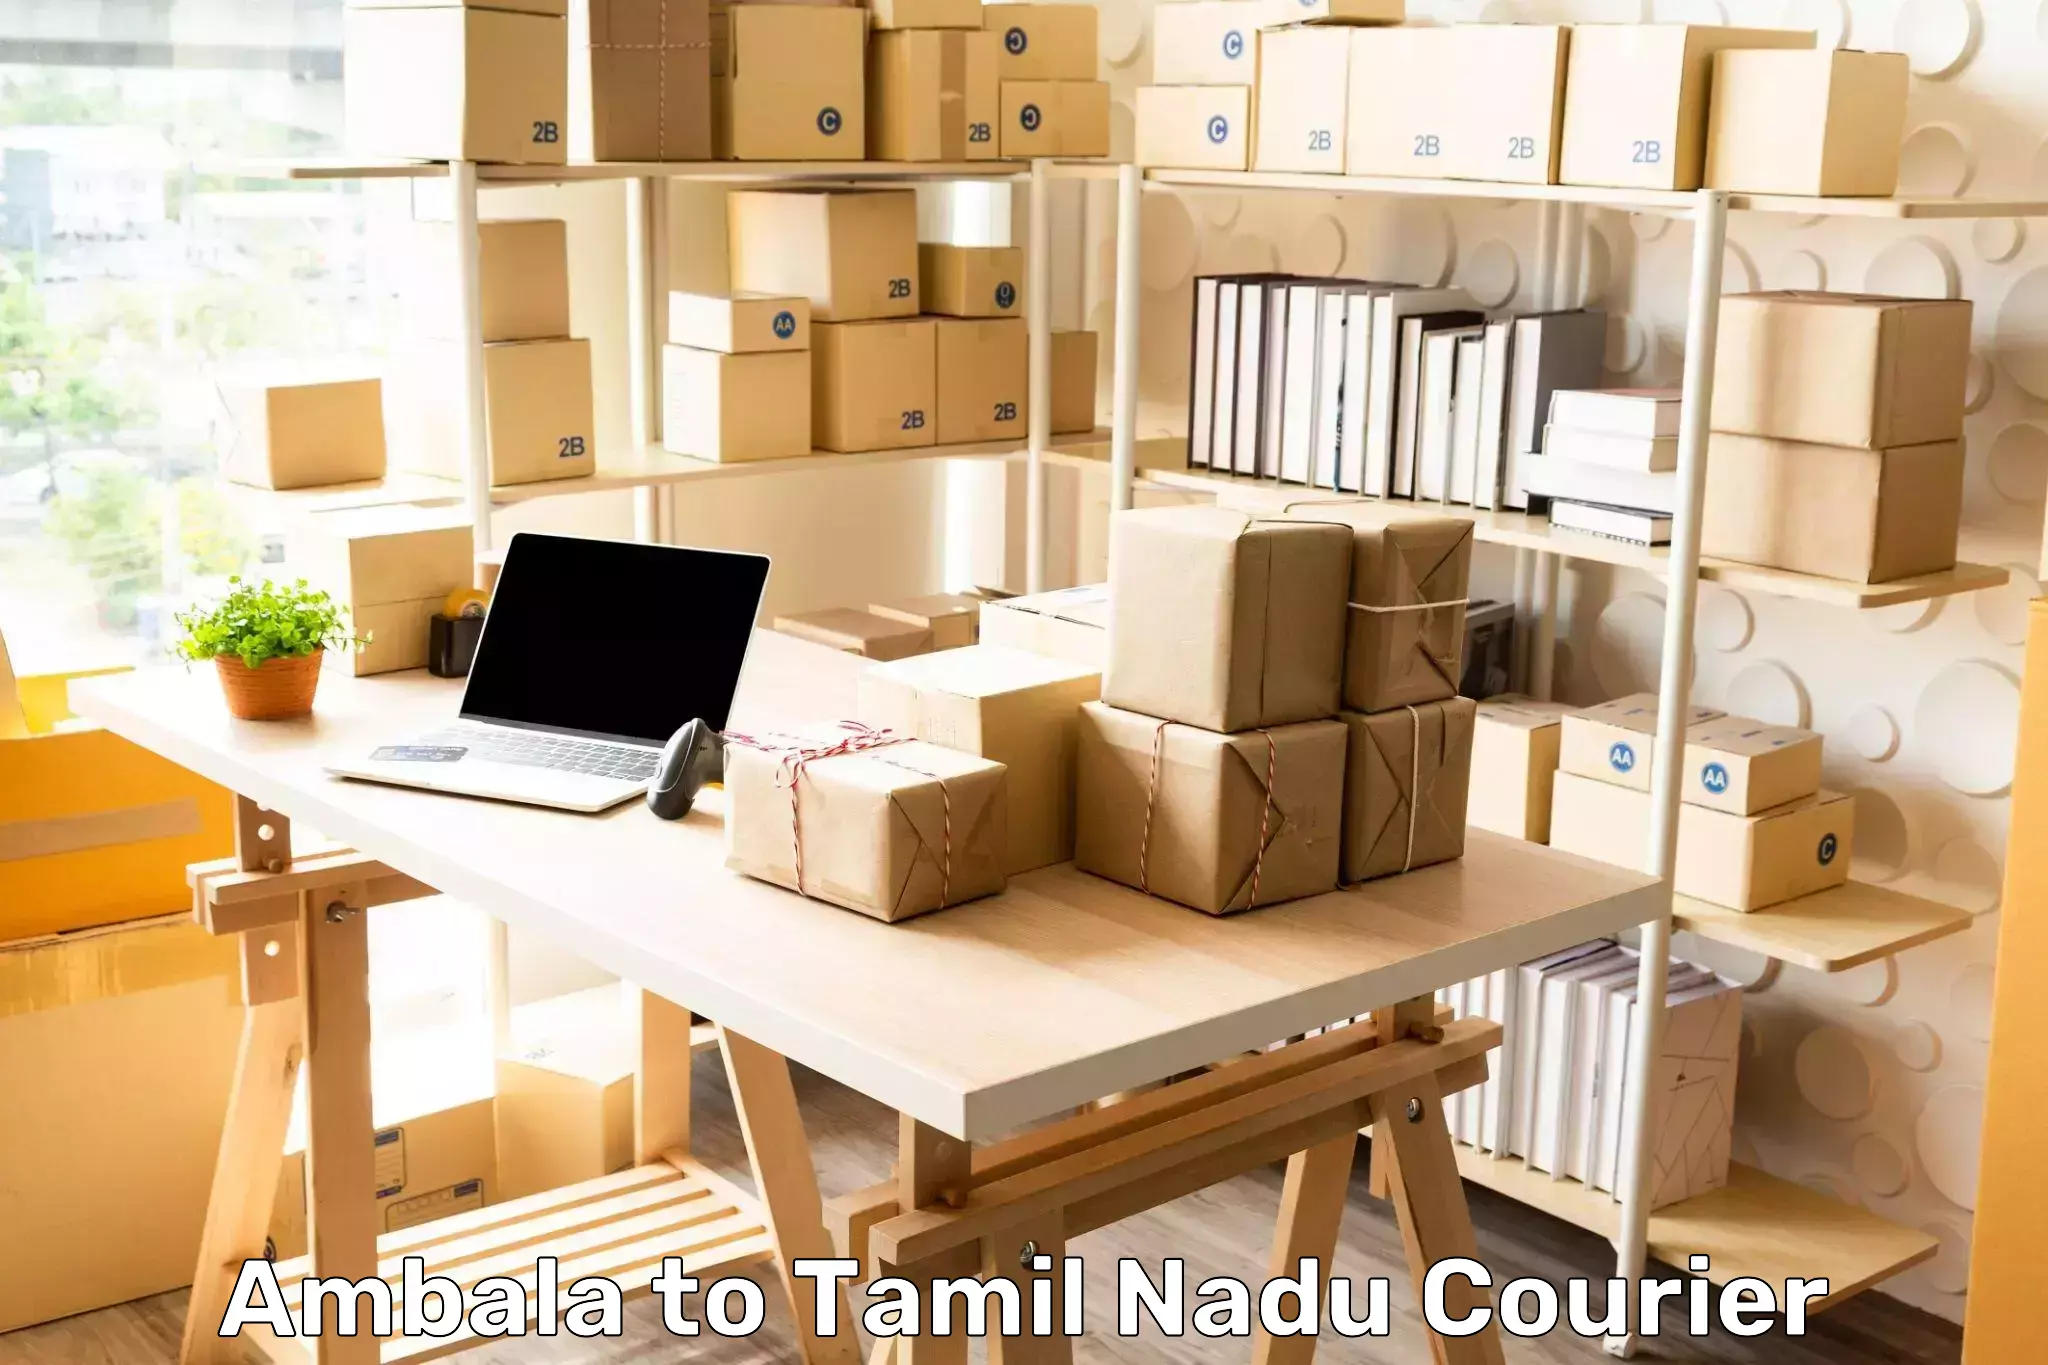 Cost-effective courier solutions Ambala to Vellore Institute of Technology